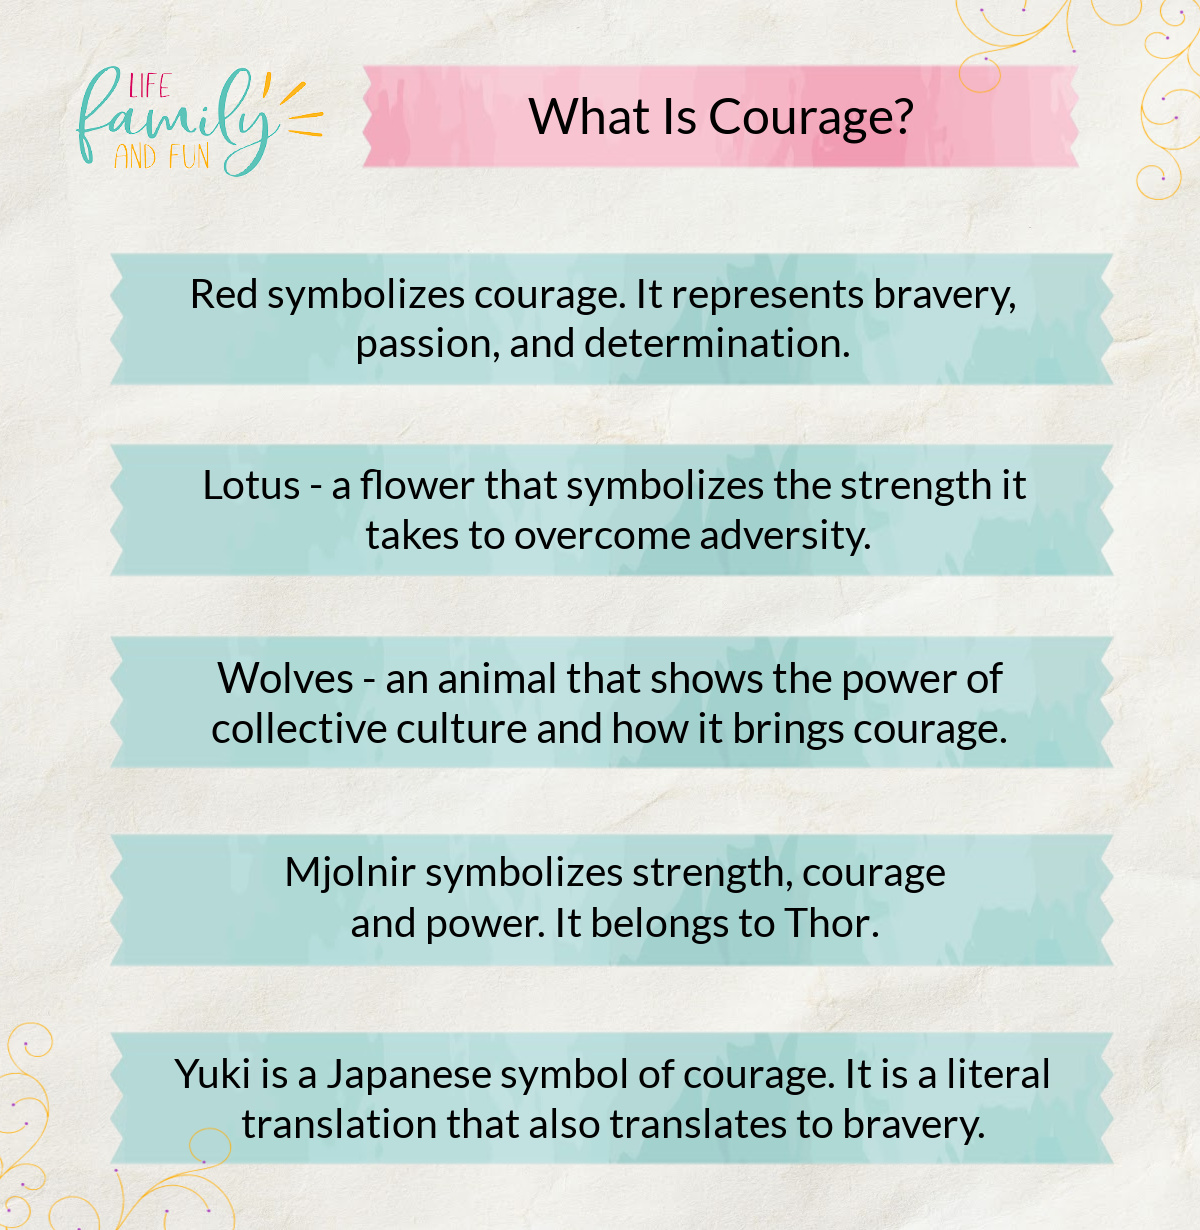 What Is Courage?